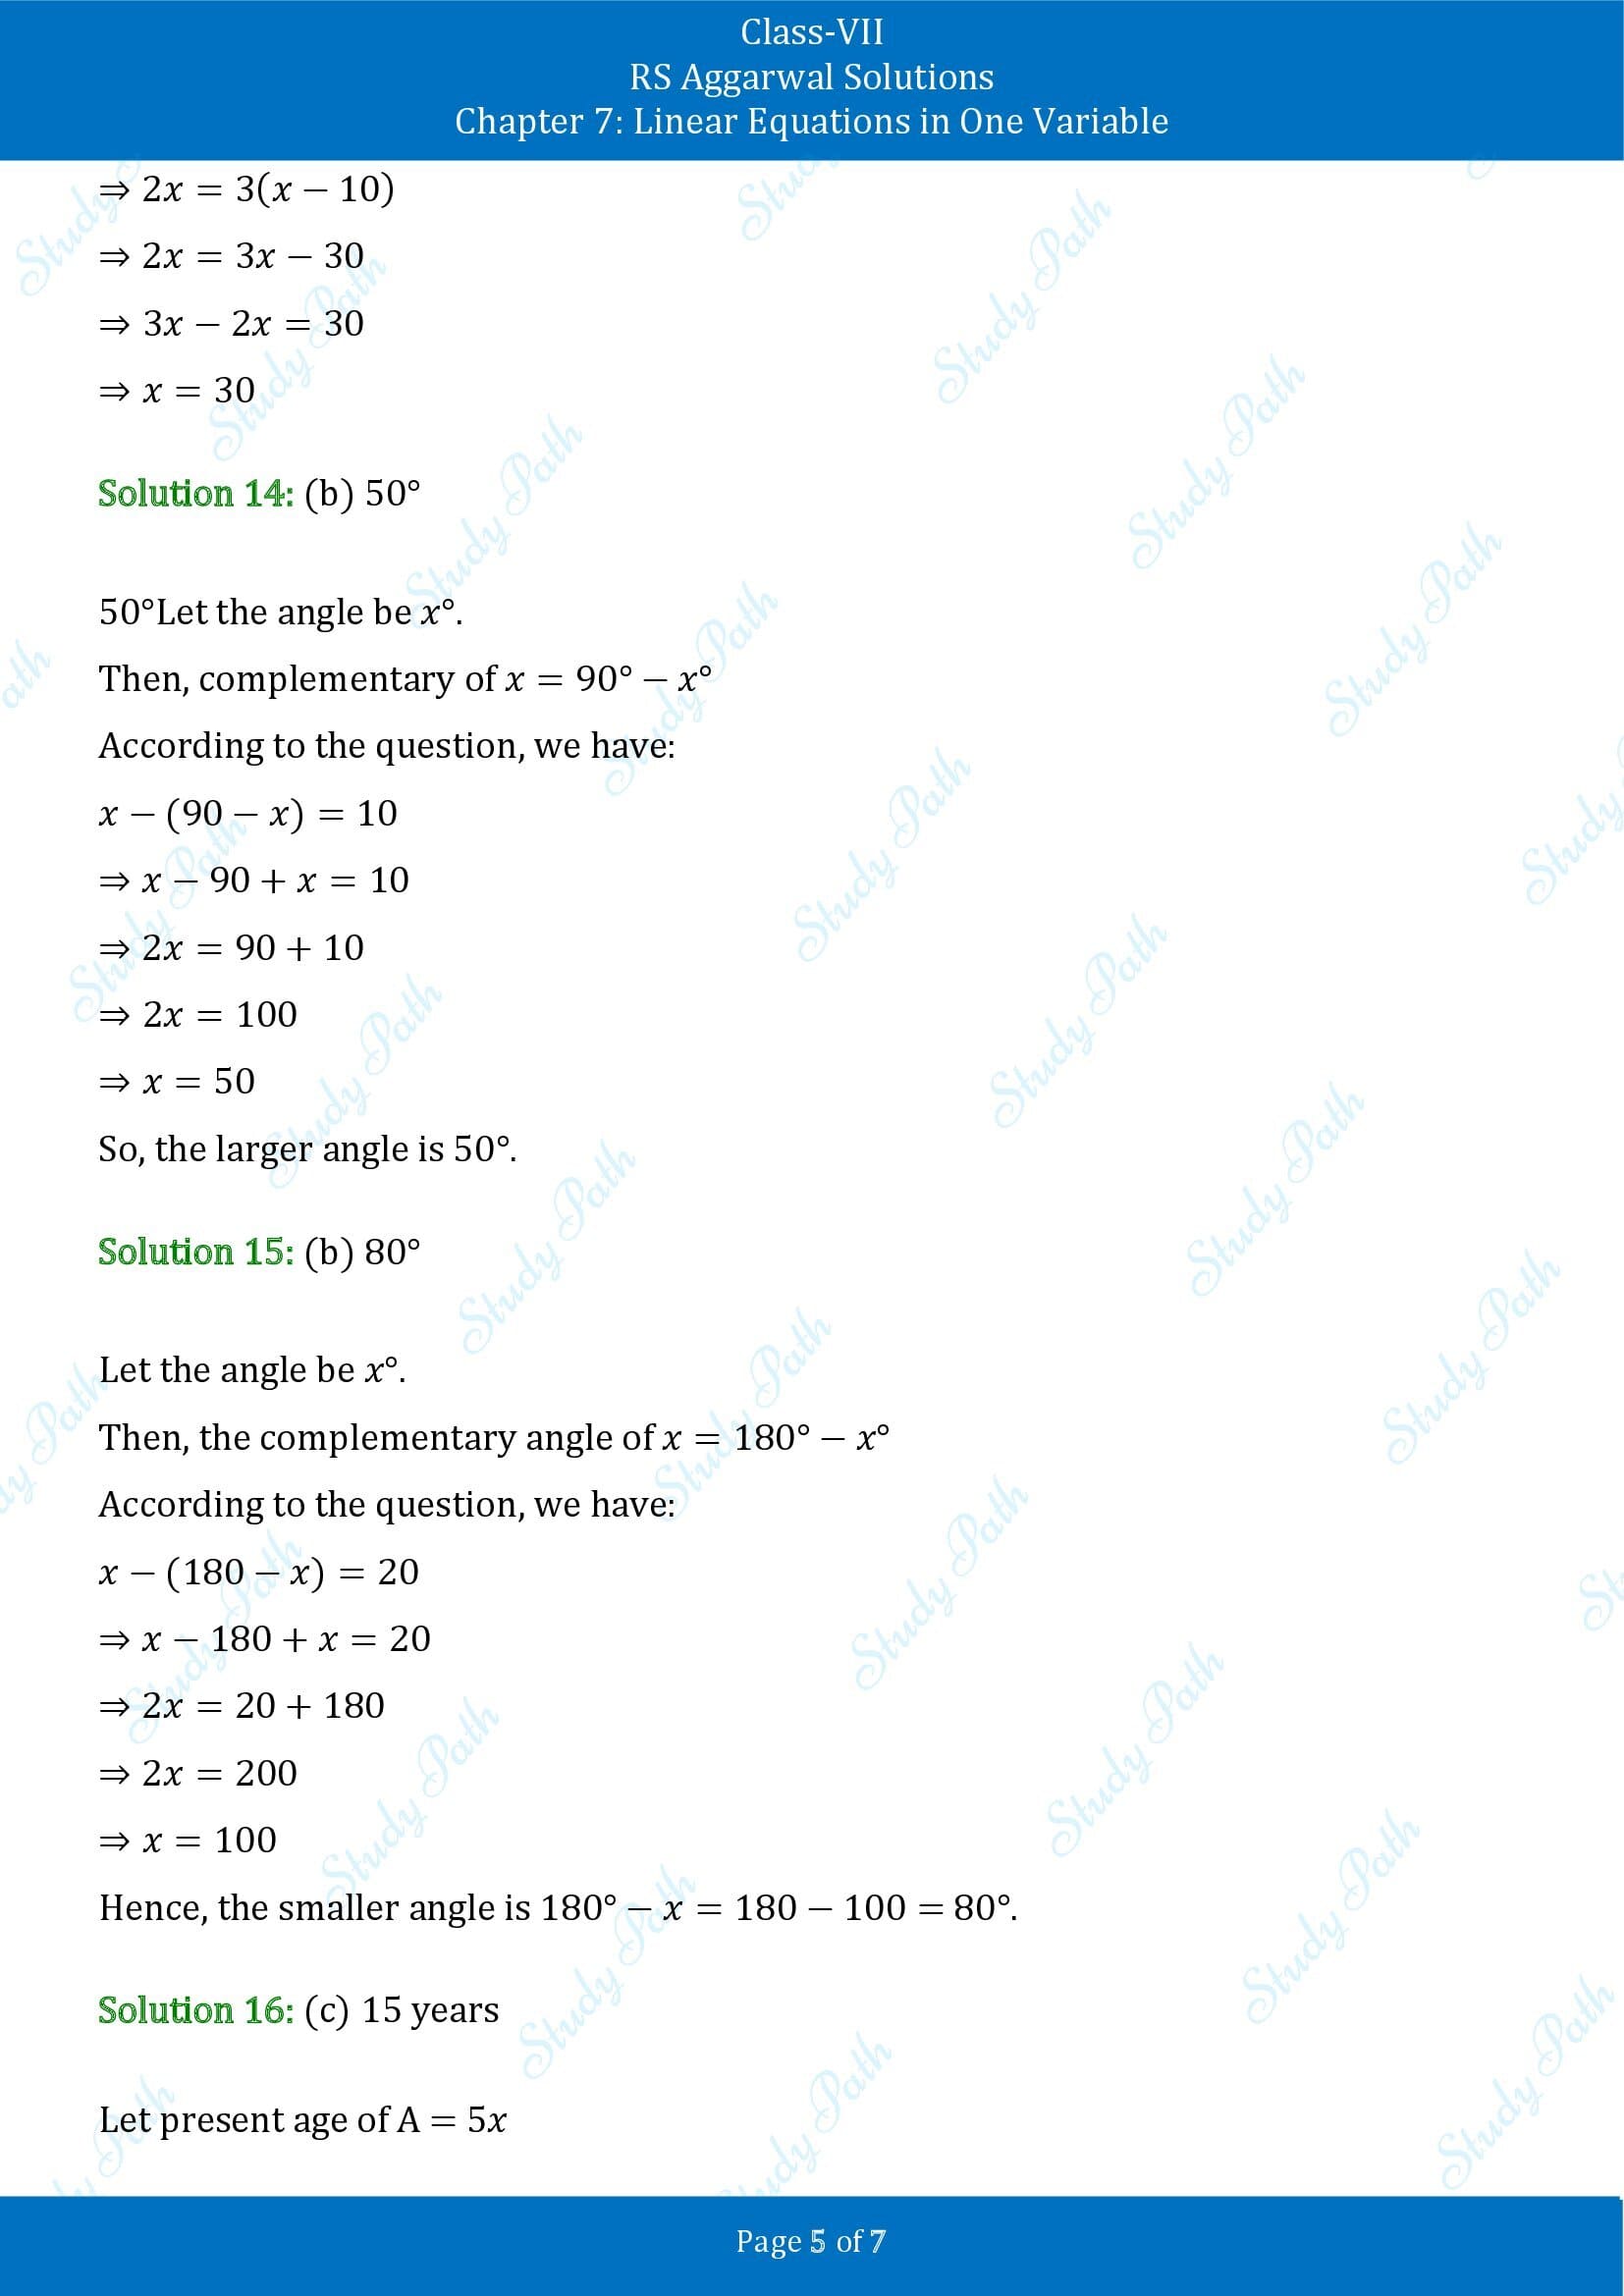 RS Aggarwal Solutions Class 7 Chapter 7 Linear Equations in One Variable Exercise 7C MCQs 00005